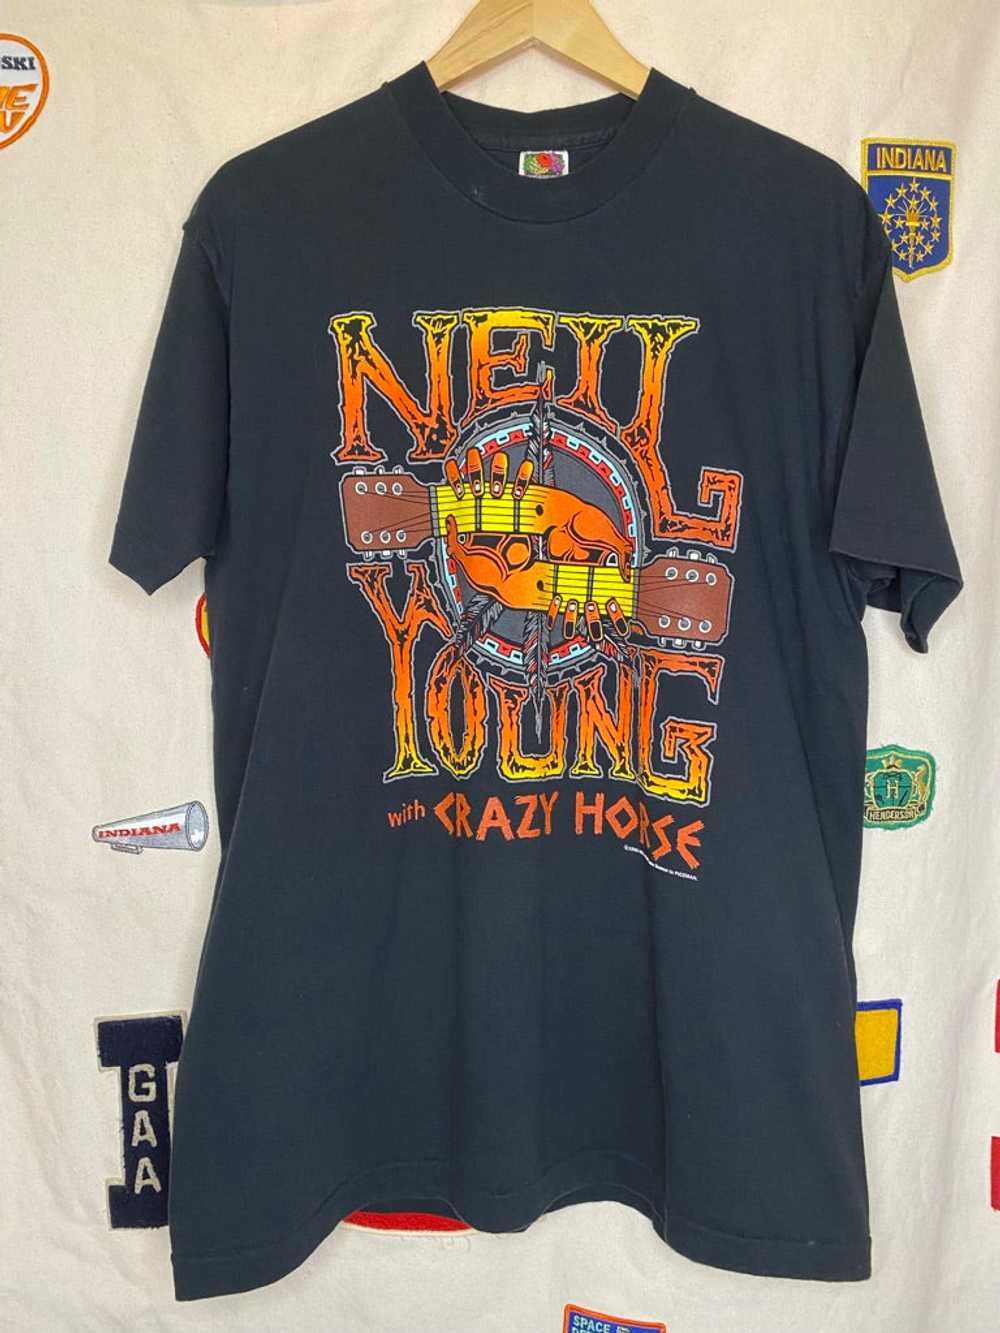 Vintage Neil Young Rock Band Shirt: XL - image 1